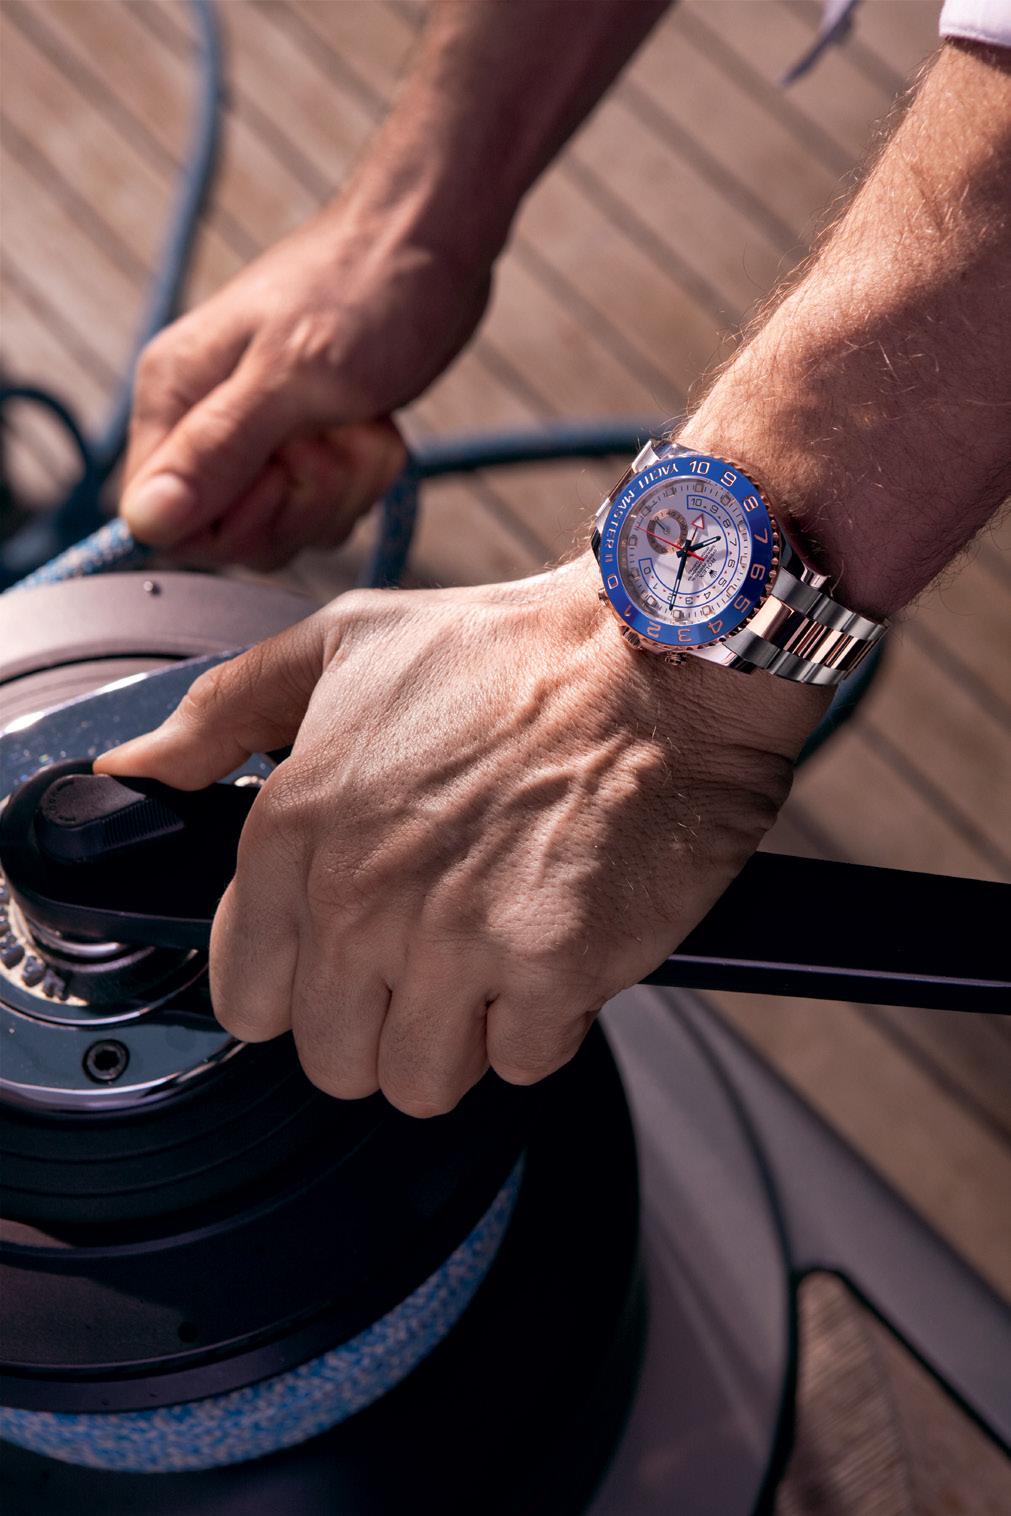 Style of the Yacht-Master II charting its course The Yacht-Master II s bold and distinguished marine character is firmly in line with the spirit of the Oyster Professional watches.